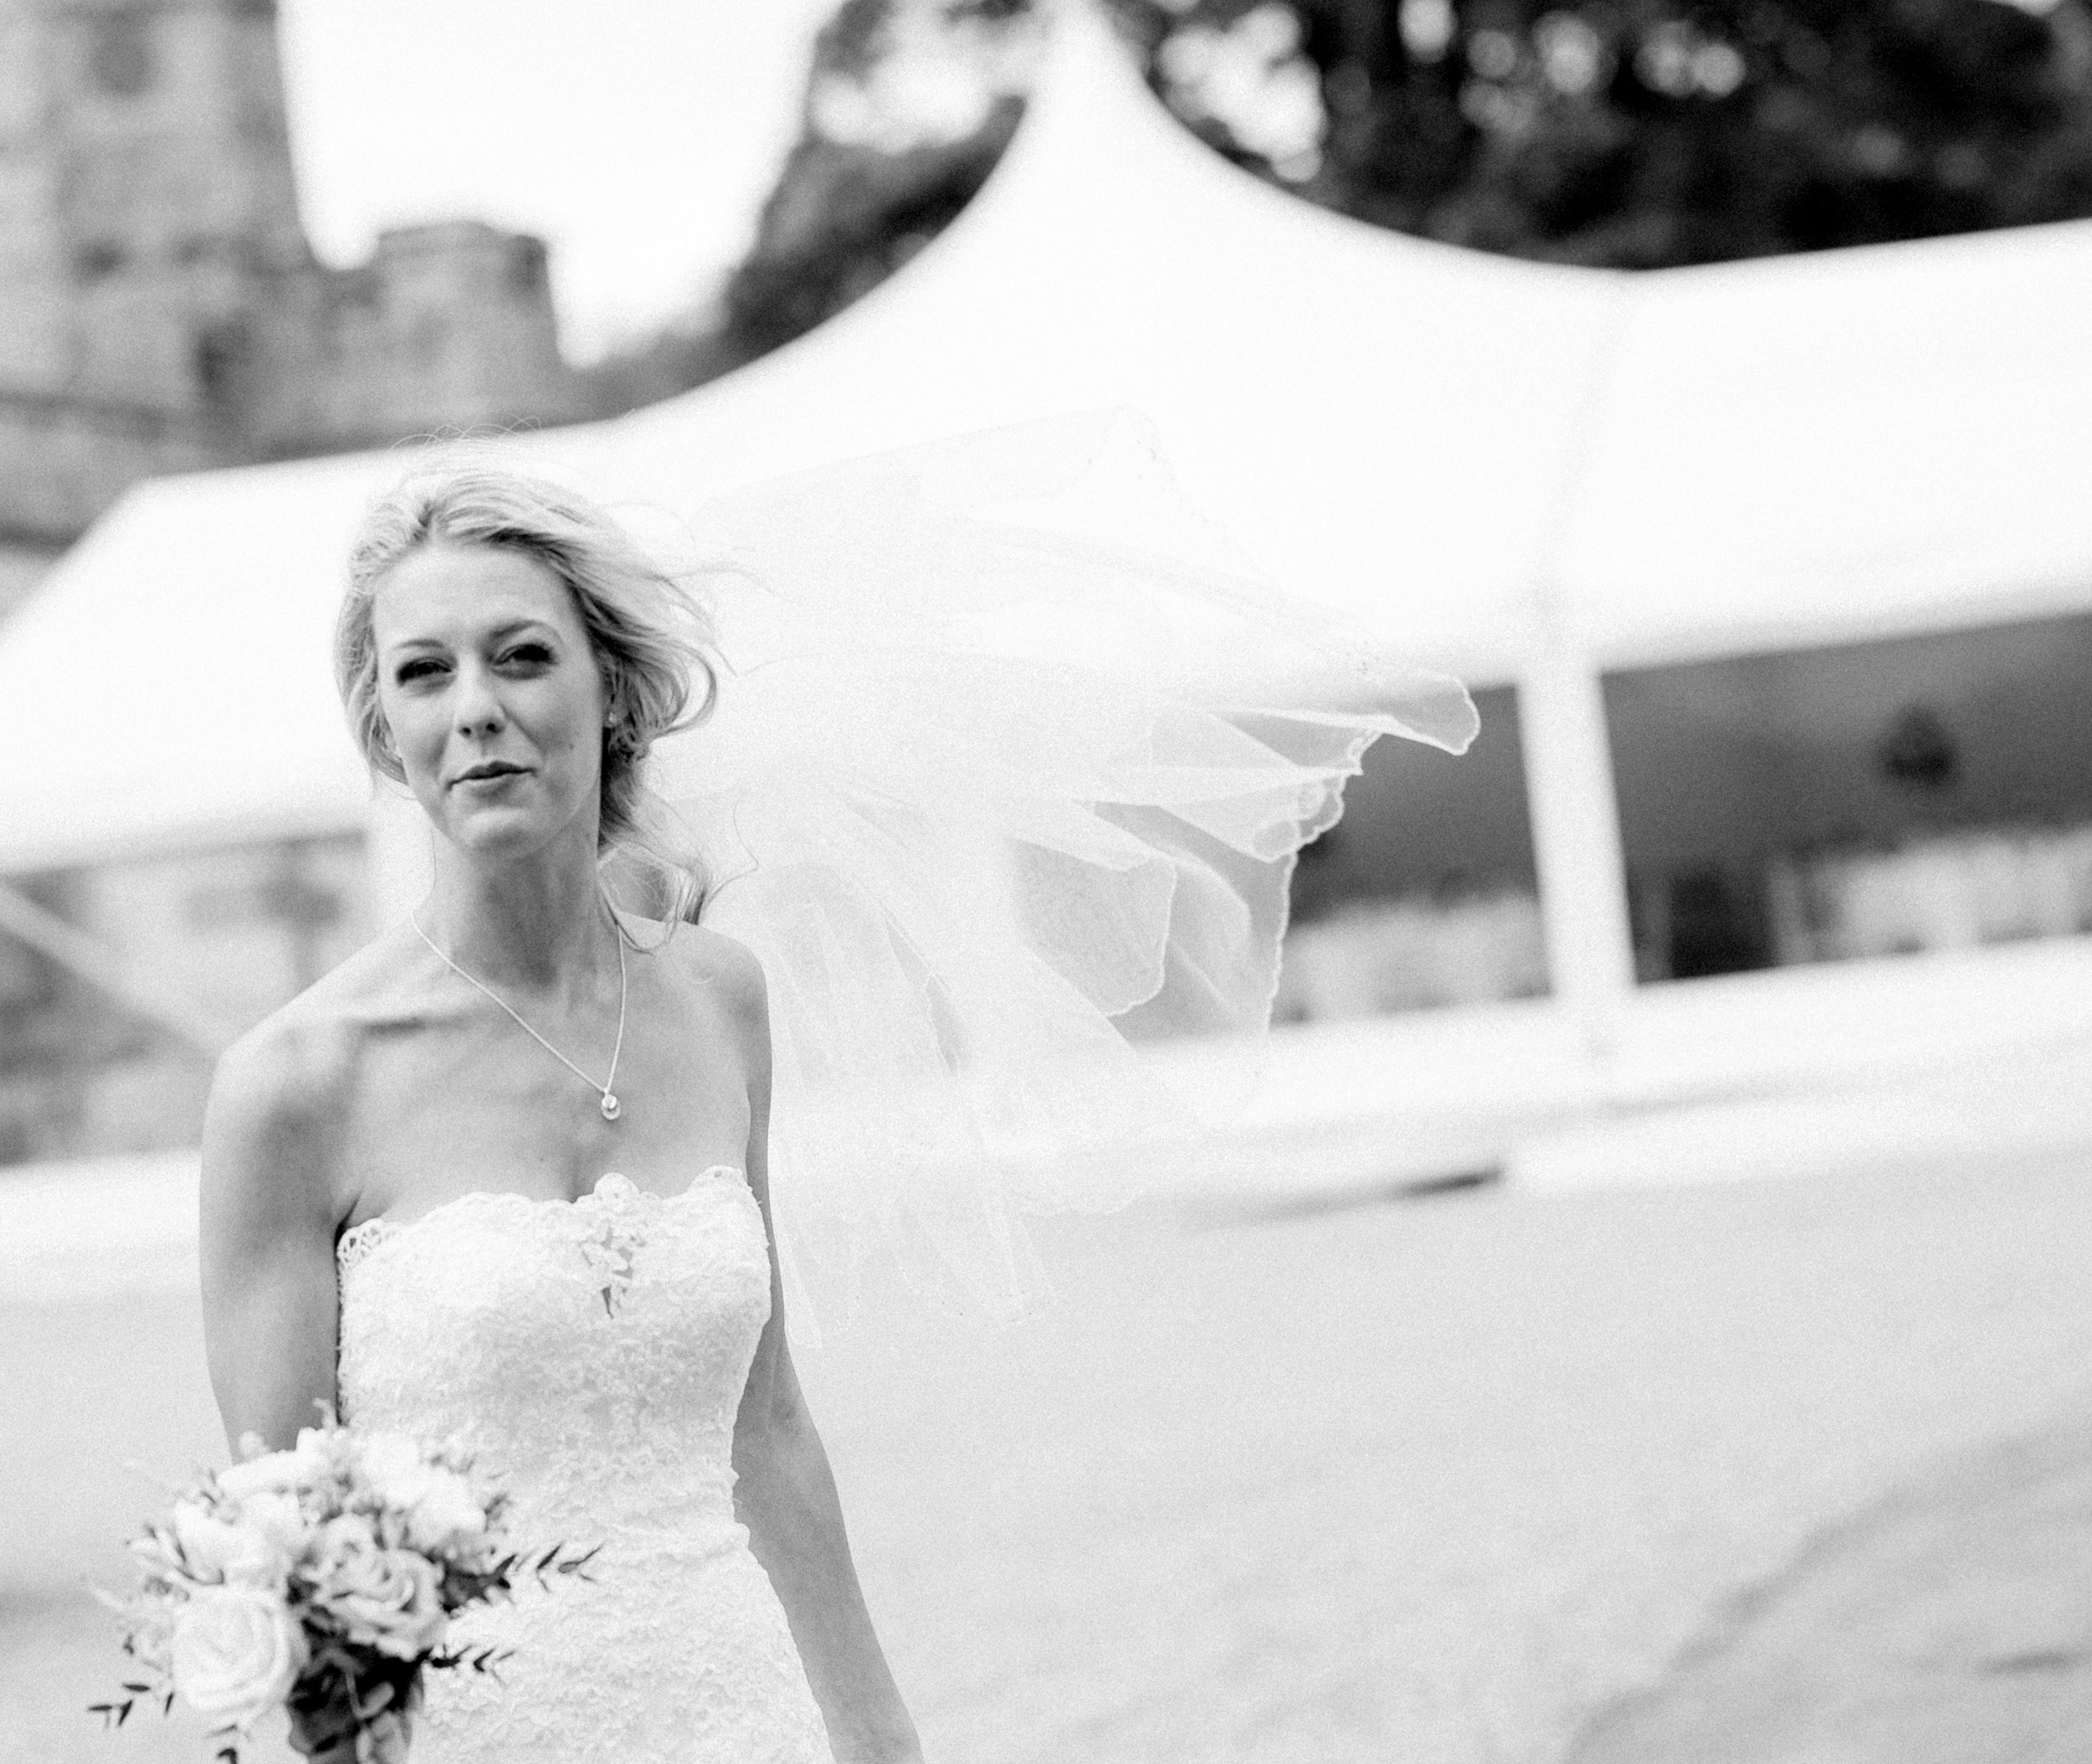 The unsuspecting bride caught in the wind